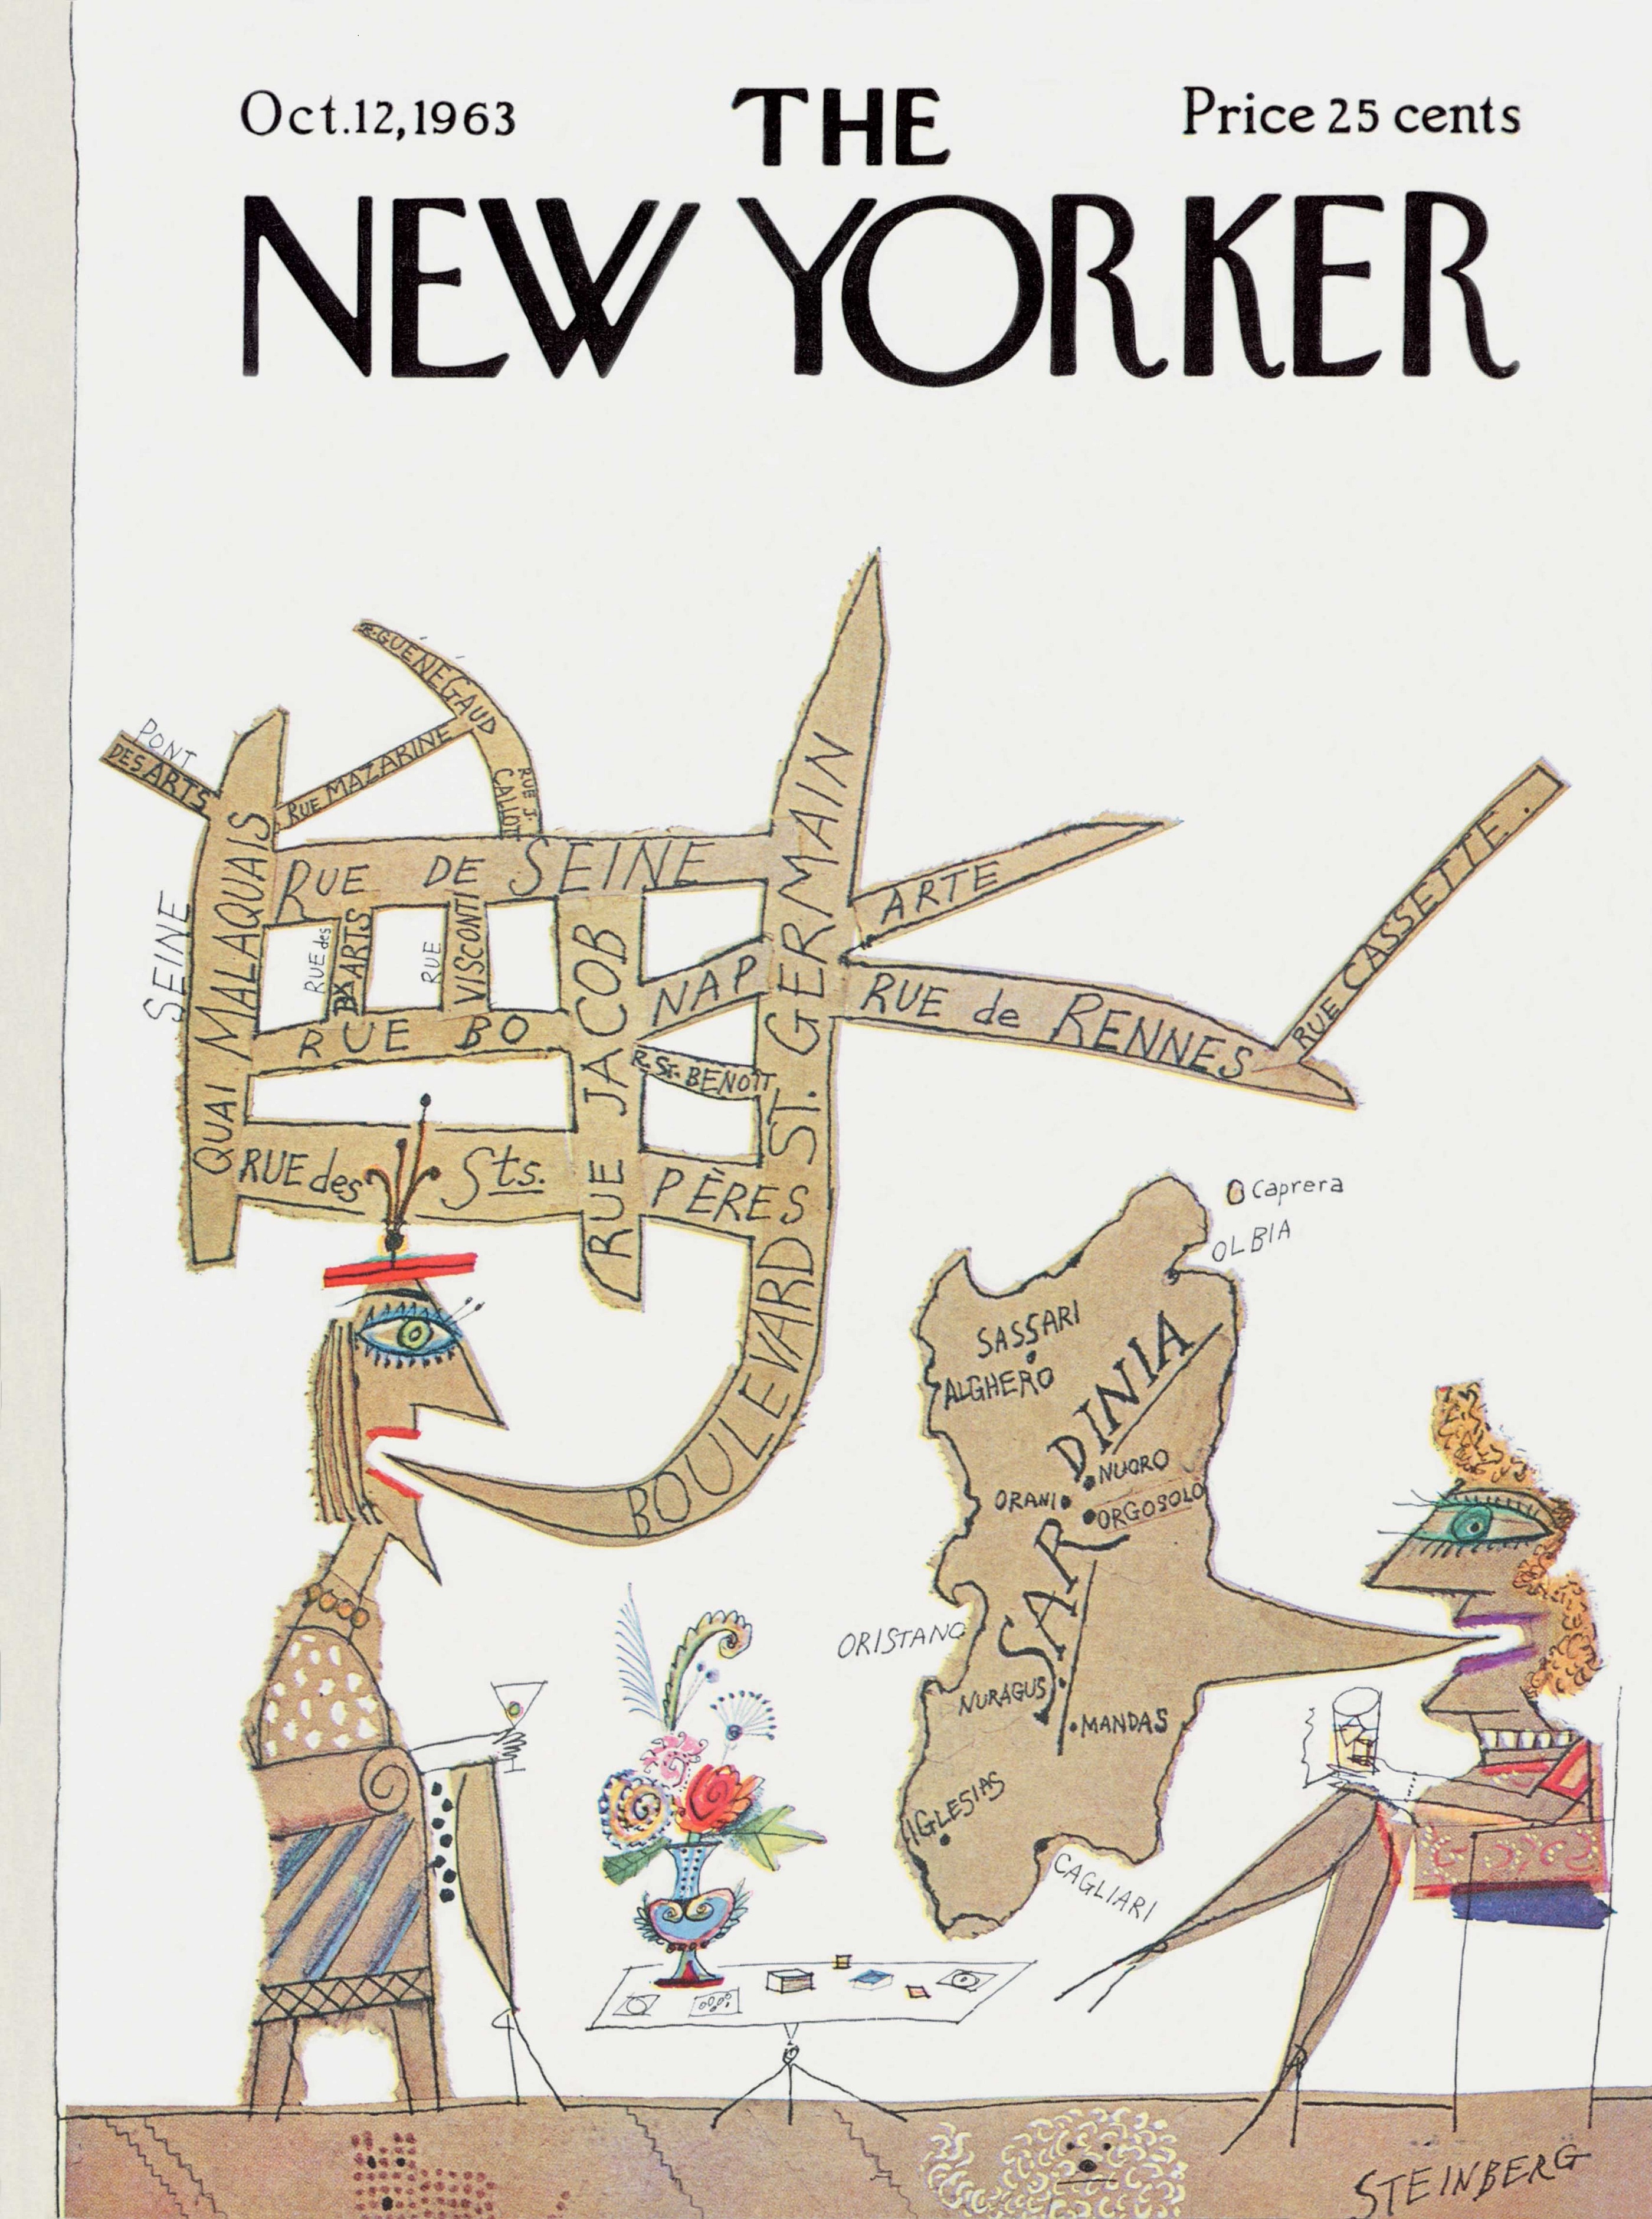 Saul Steinberg, Copertina del "The New Yorker", 12 Ottobre 1963 © The Saul Steinberg Foundation /Artists Rights Society (ARS), New York 